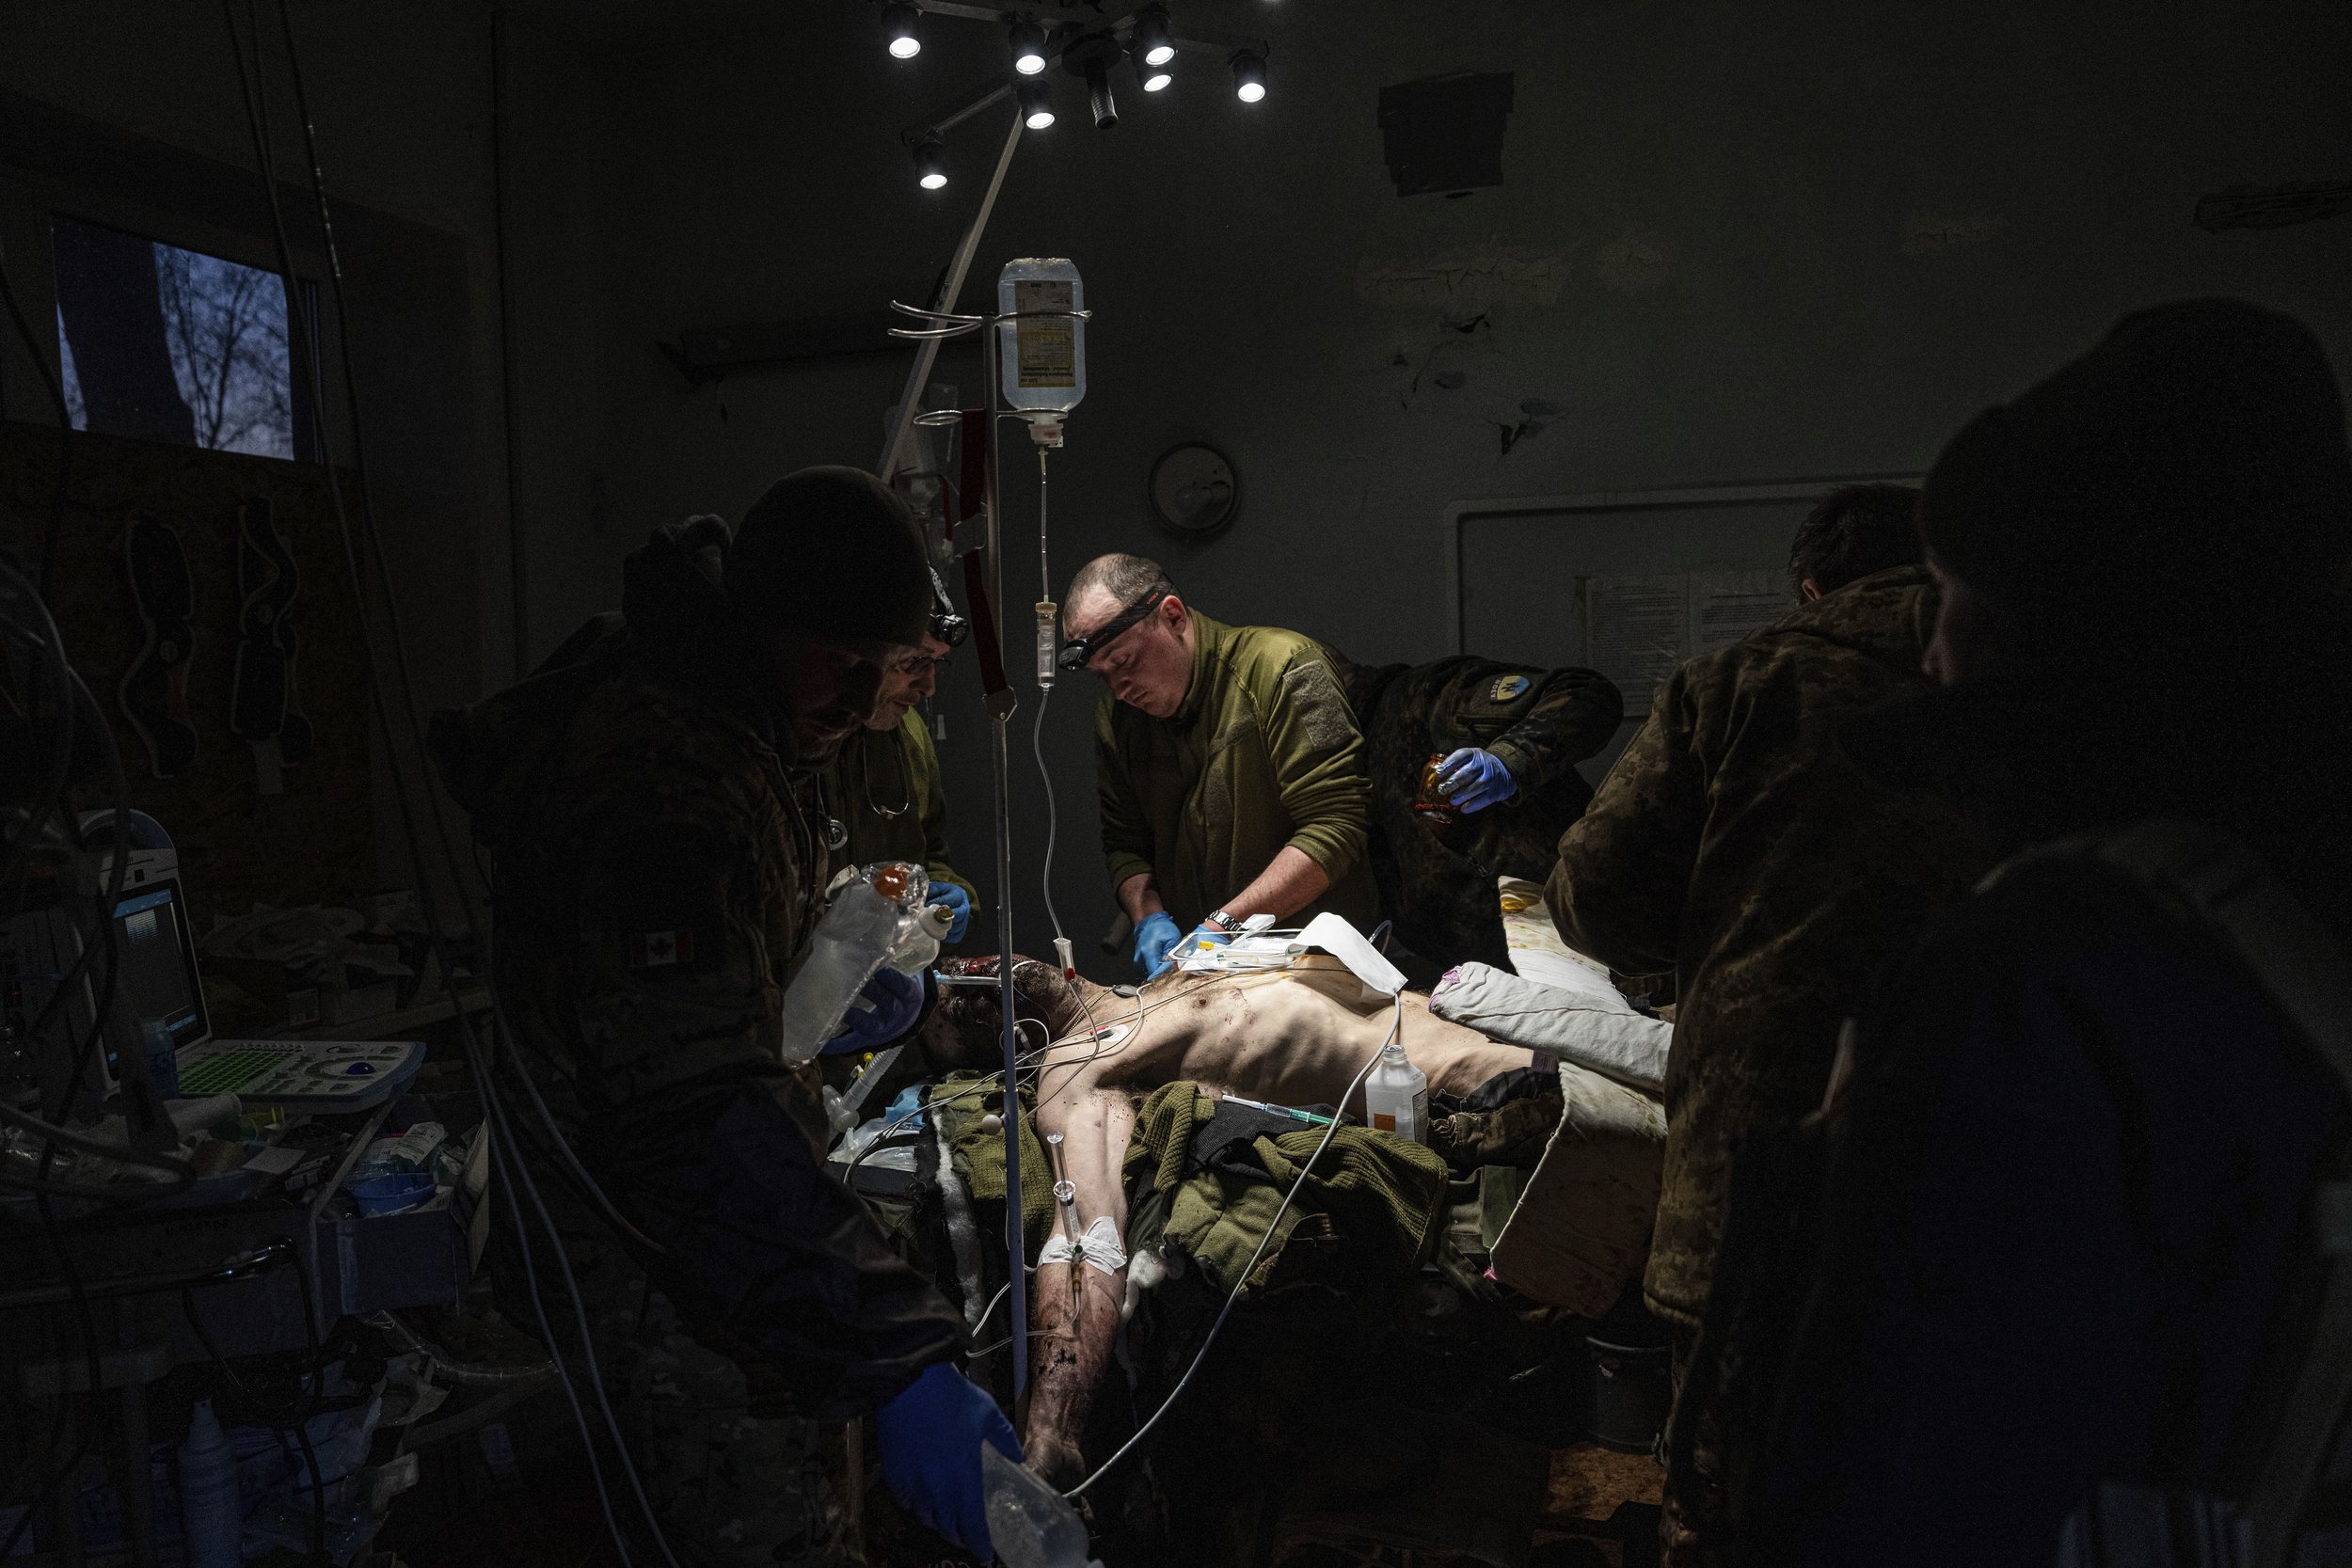  Ukrainian military doctors treat their injured comrade, who was evacuated from the battlefield, at the hospital in Ukraine’s Donetsk region on Jan. 9, 2023. The serviceman did not survive. (AP Photo/Evgeniy Maloletka) 